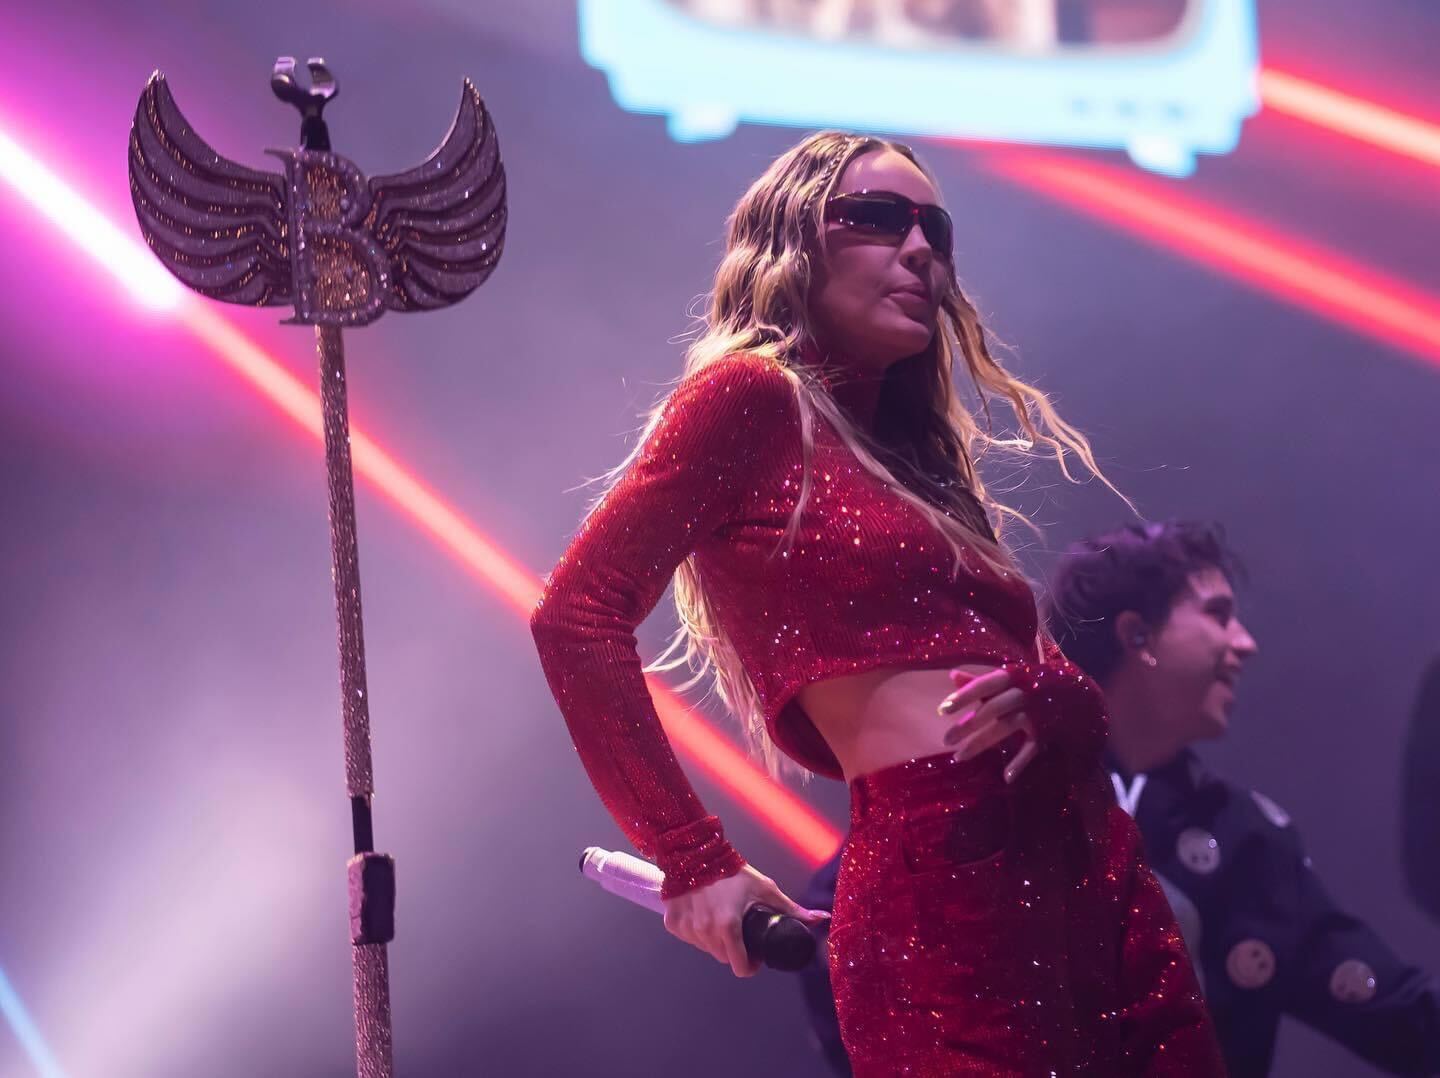 These were the best acts we saw at Tecate Emblema 2023